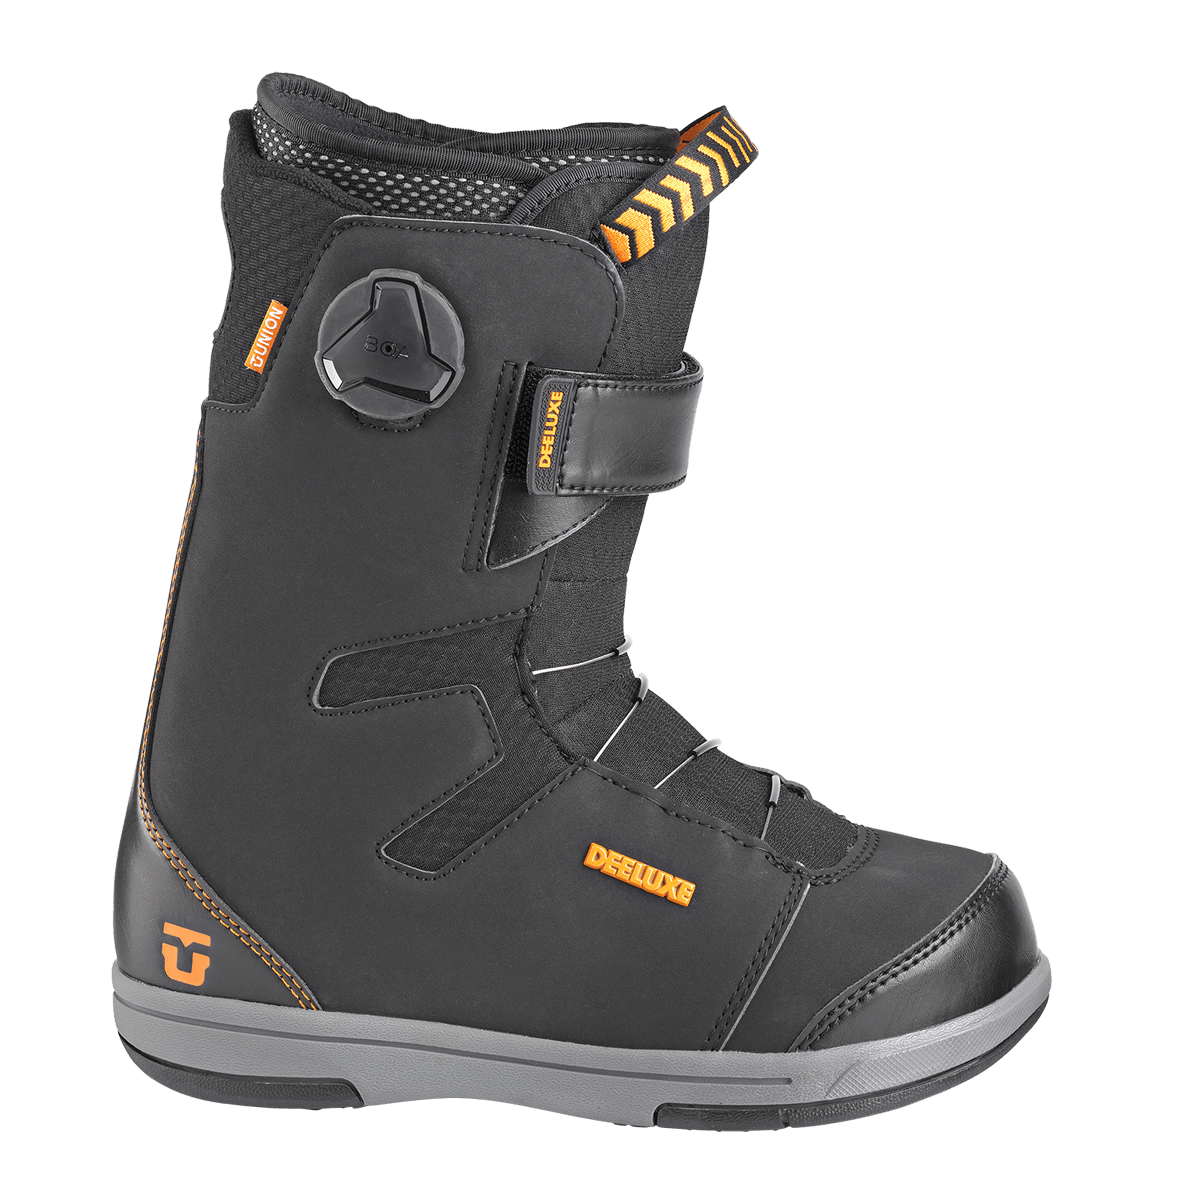 Deluxe Cadet Youth Snowboard Boot (closeout)